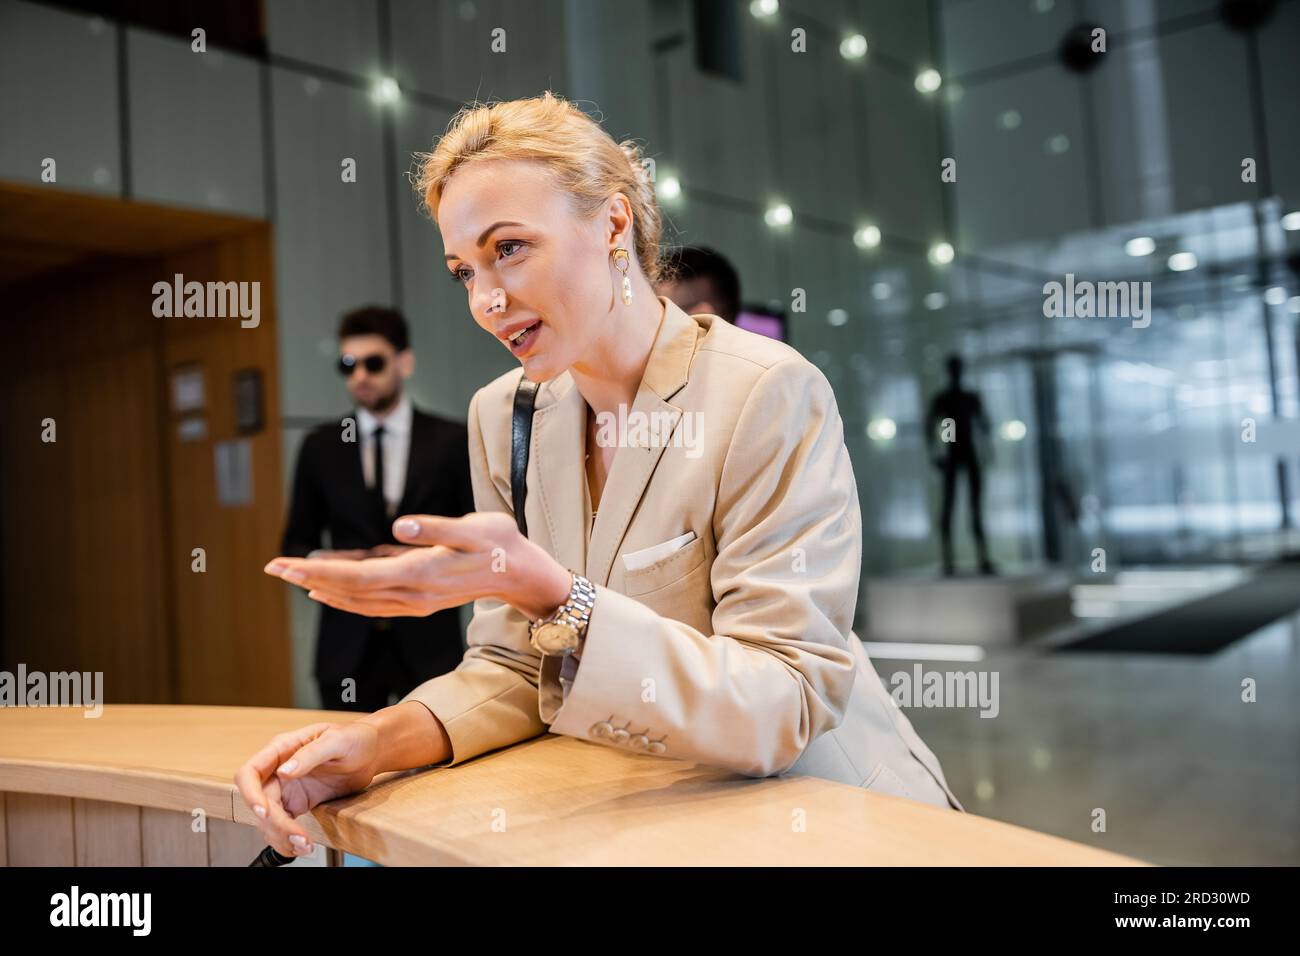 blonde woman in suit gesturing while talking at reception desk, personal security service concept, bodyguards in suits standing on blurred background, Stock Photo